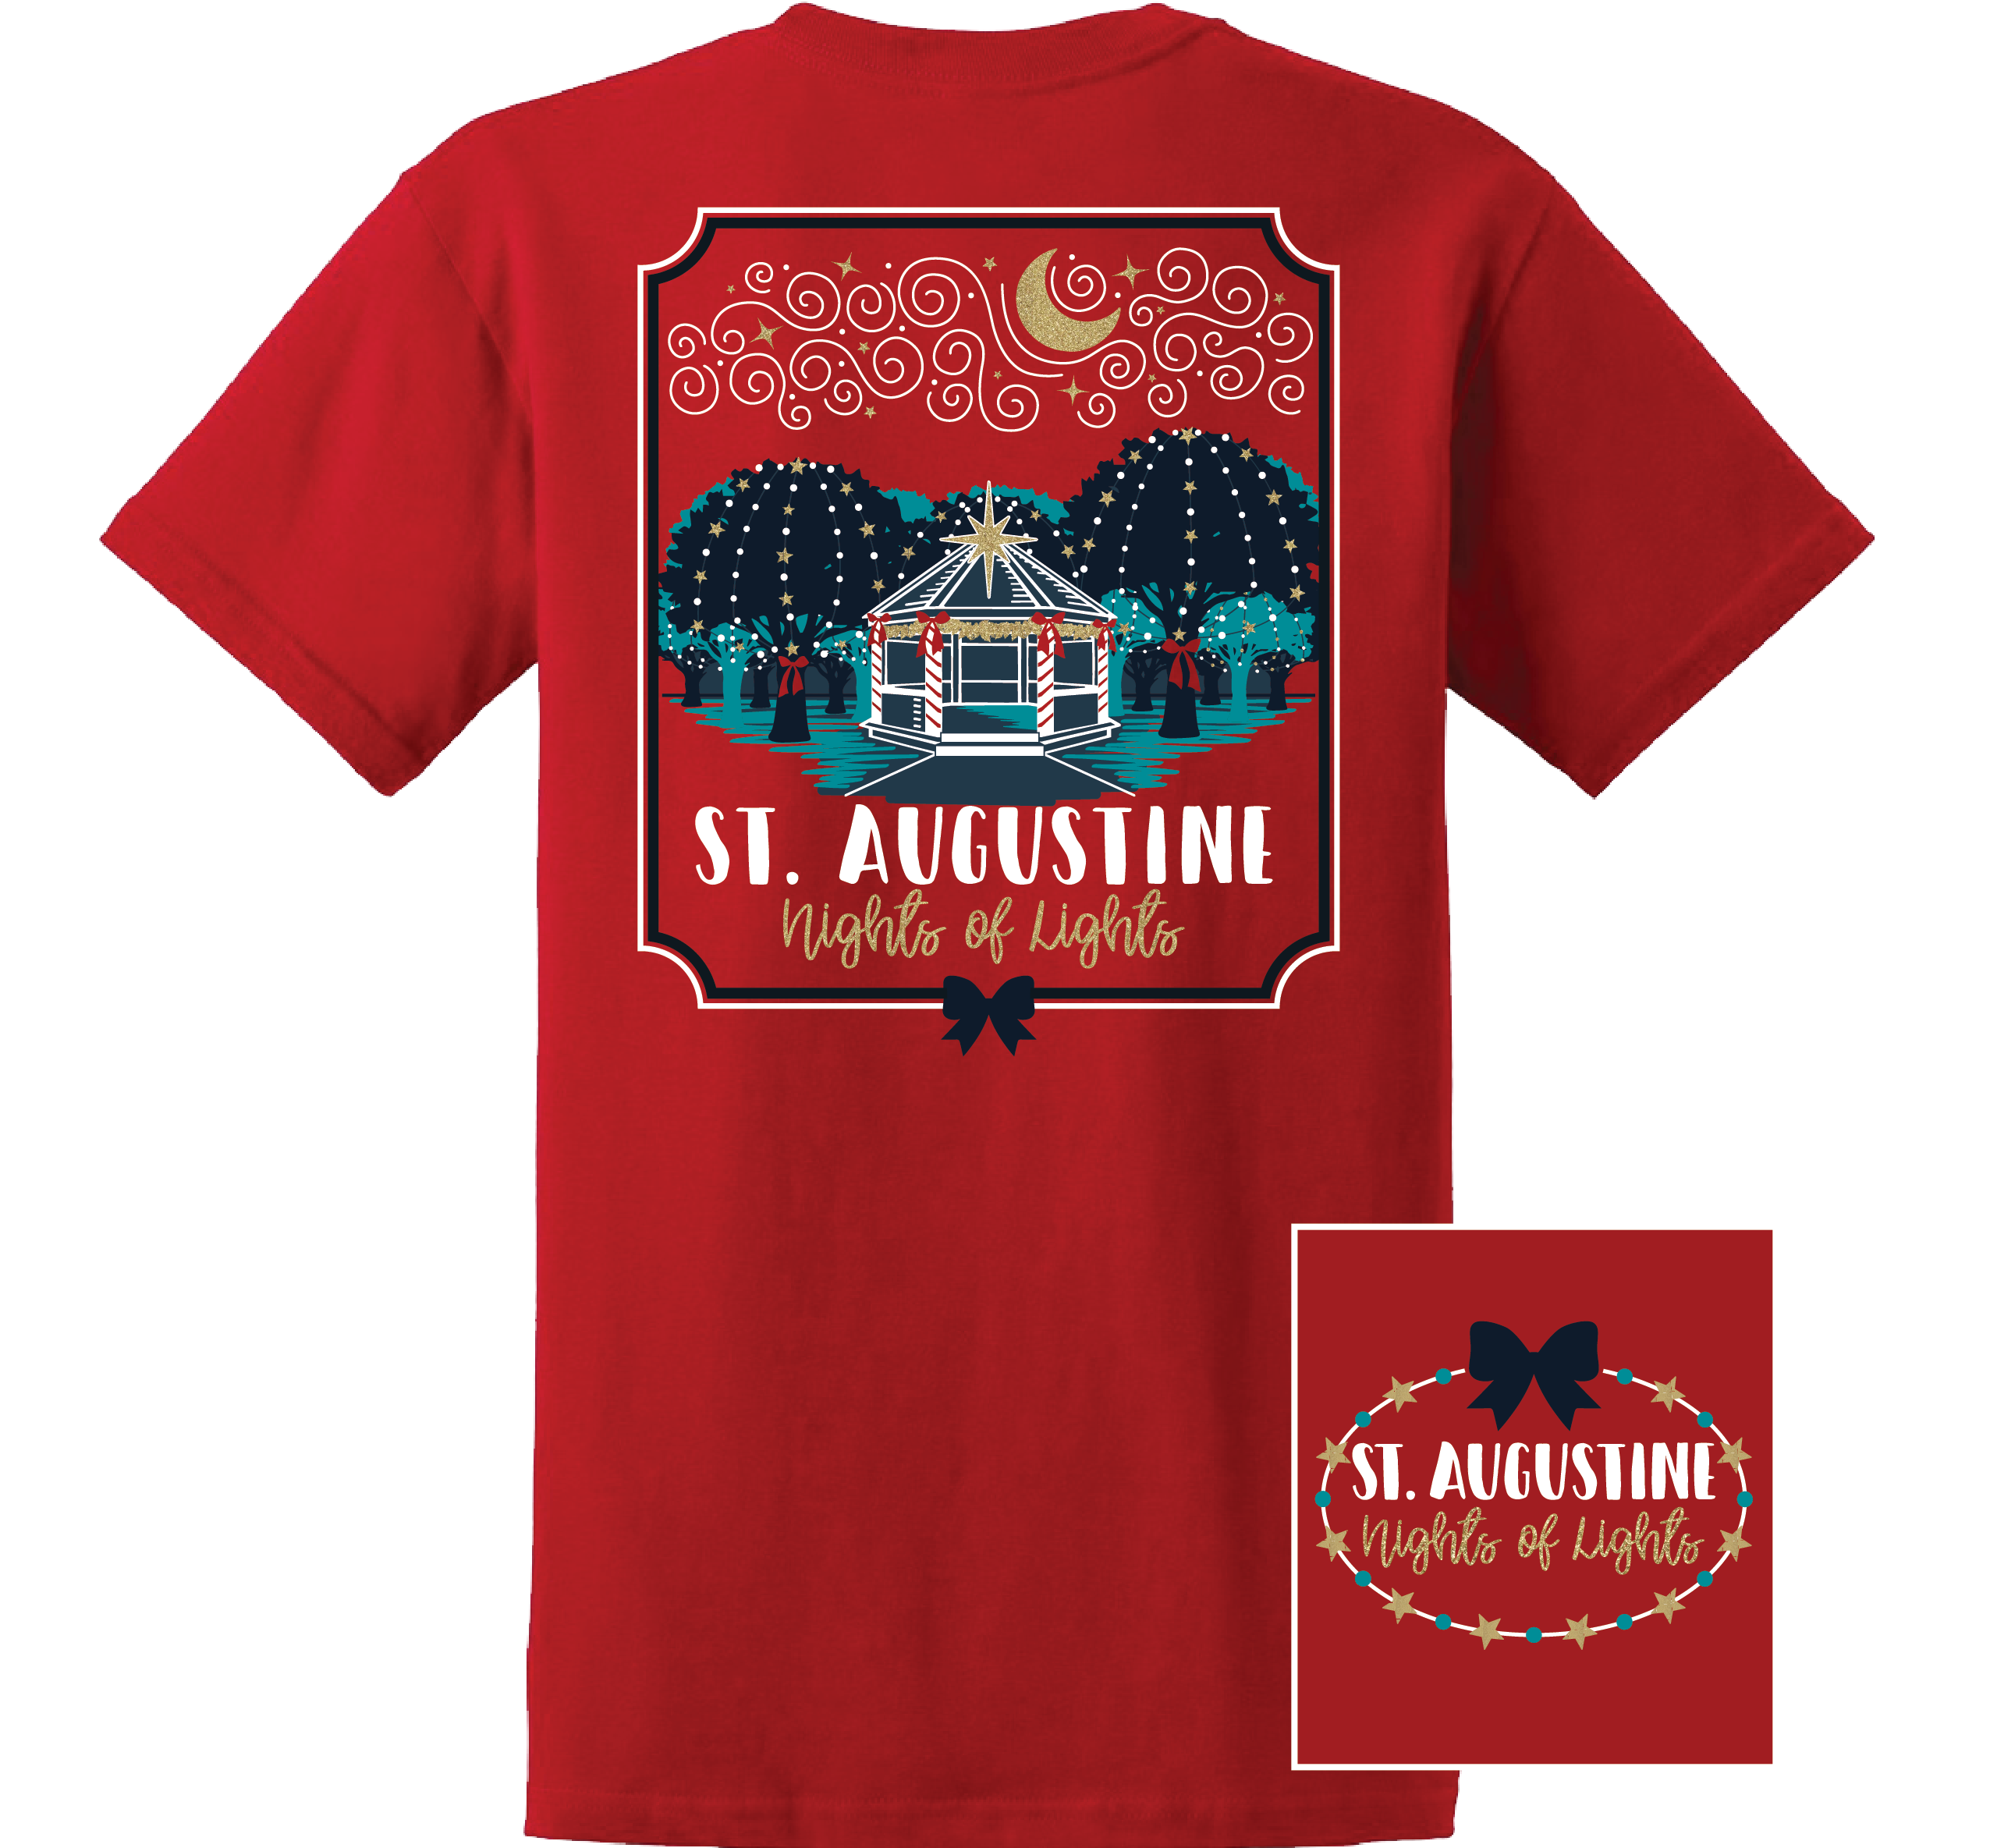 St Augustine Nights Of Lights Short Sleeve Tee Shirt - Red - Artsy Abode